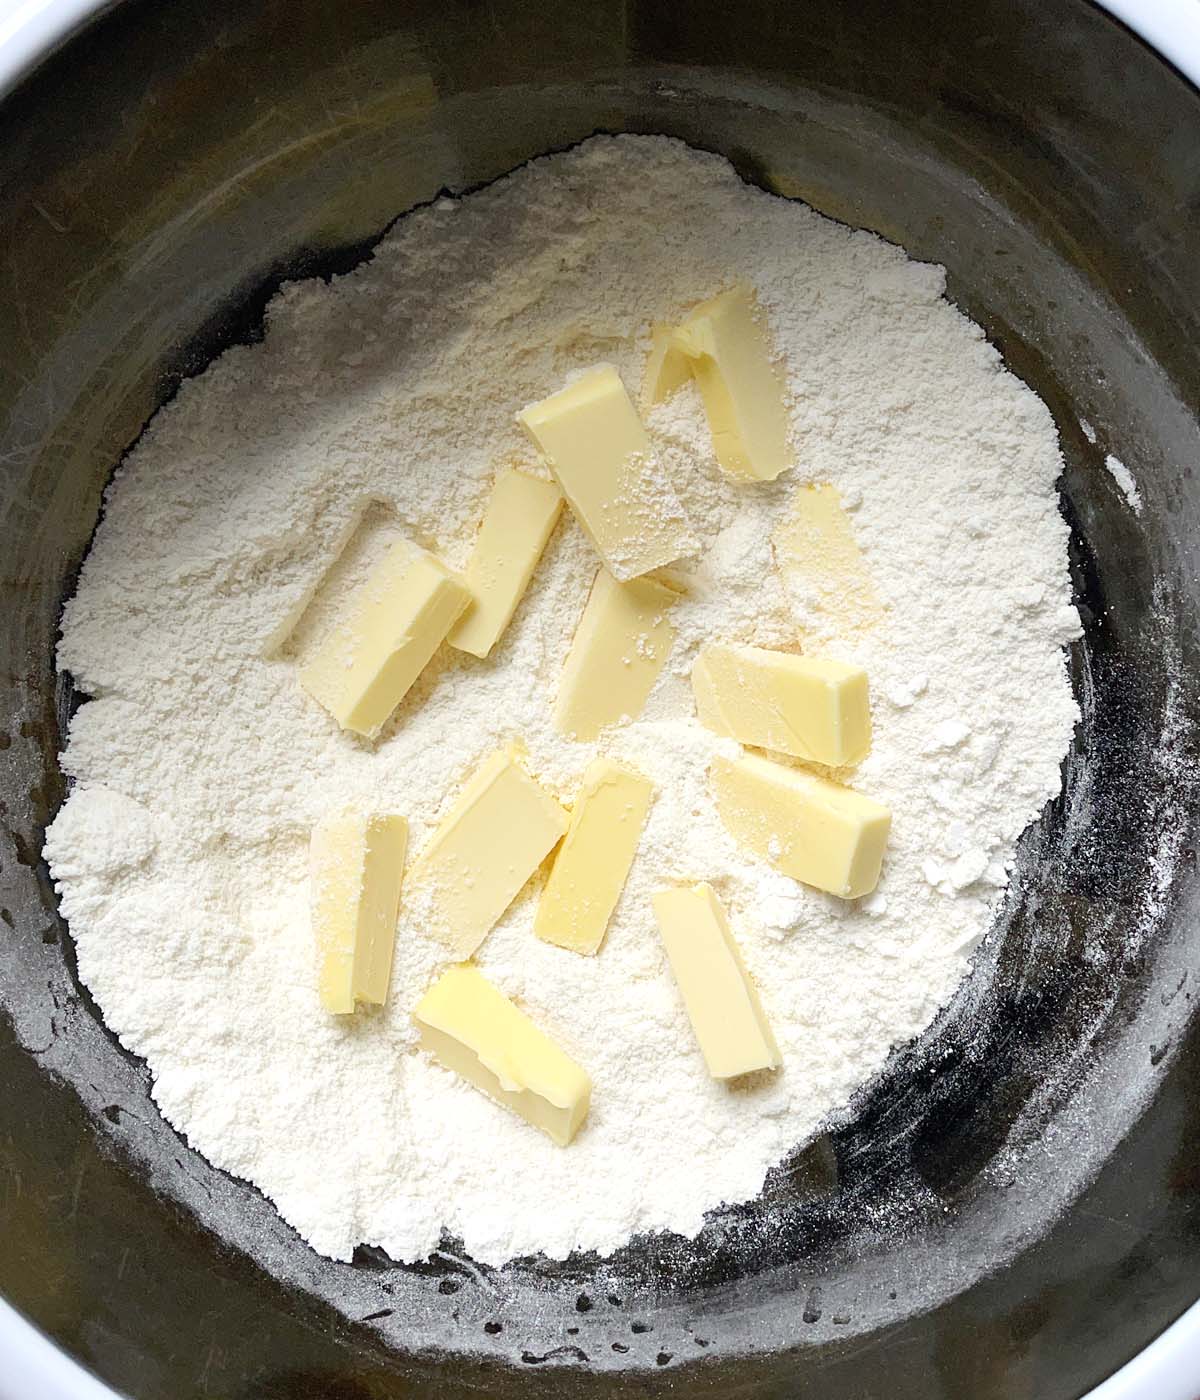 A round black bowl containing white flours and yellow butter chunks.